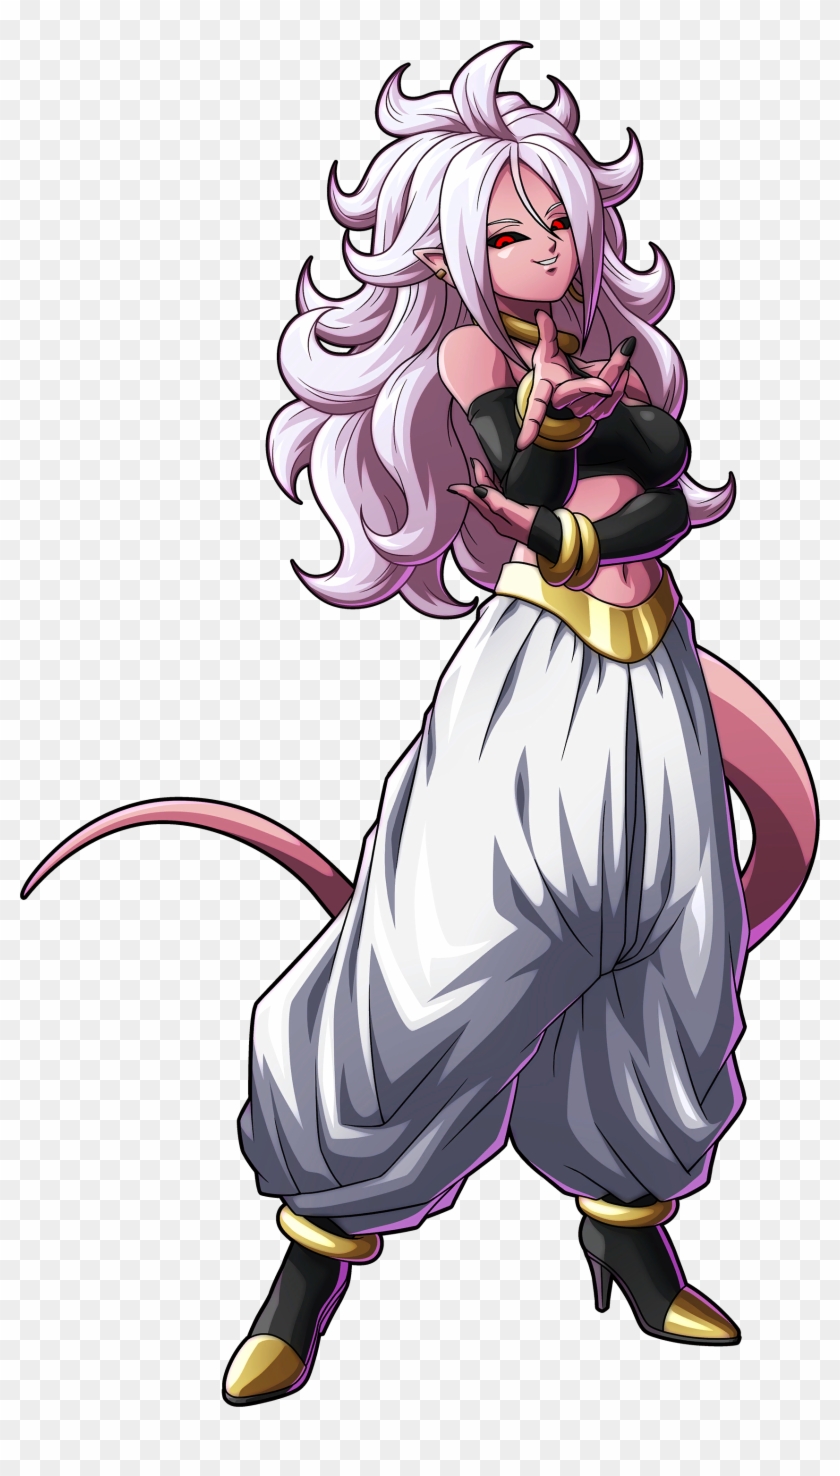 The Resolution Of The Pictures From The Character Select - Dragon Ball Fighterz Android 21 Evil Clipart #3971986